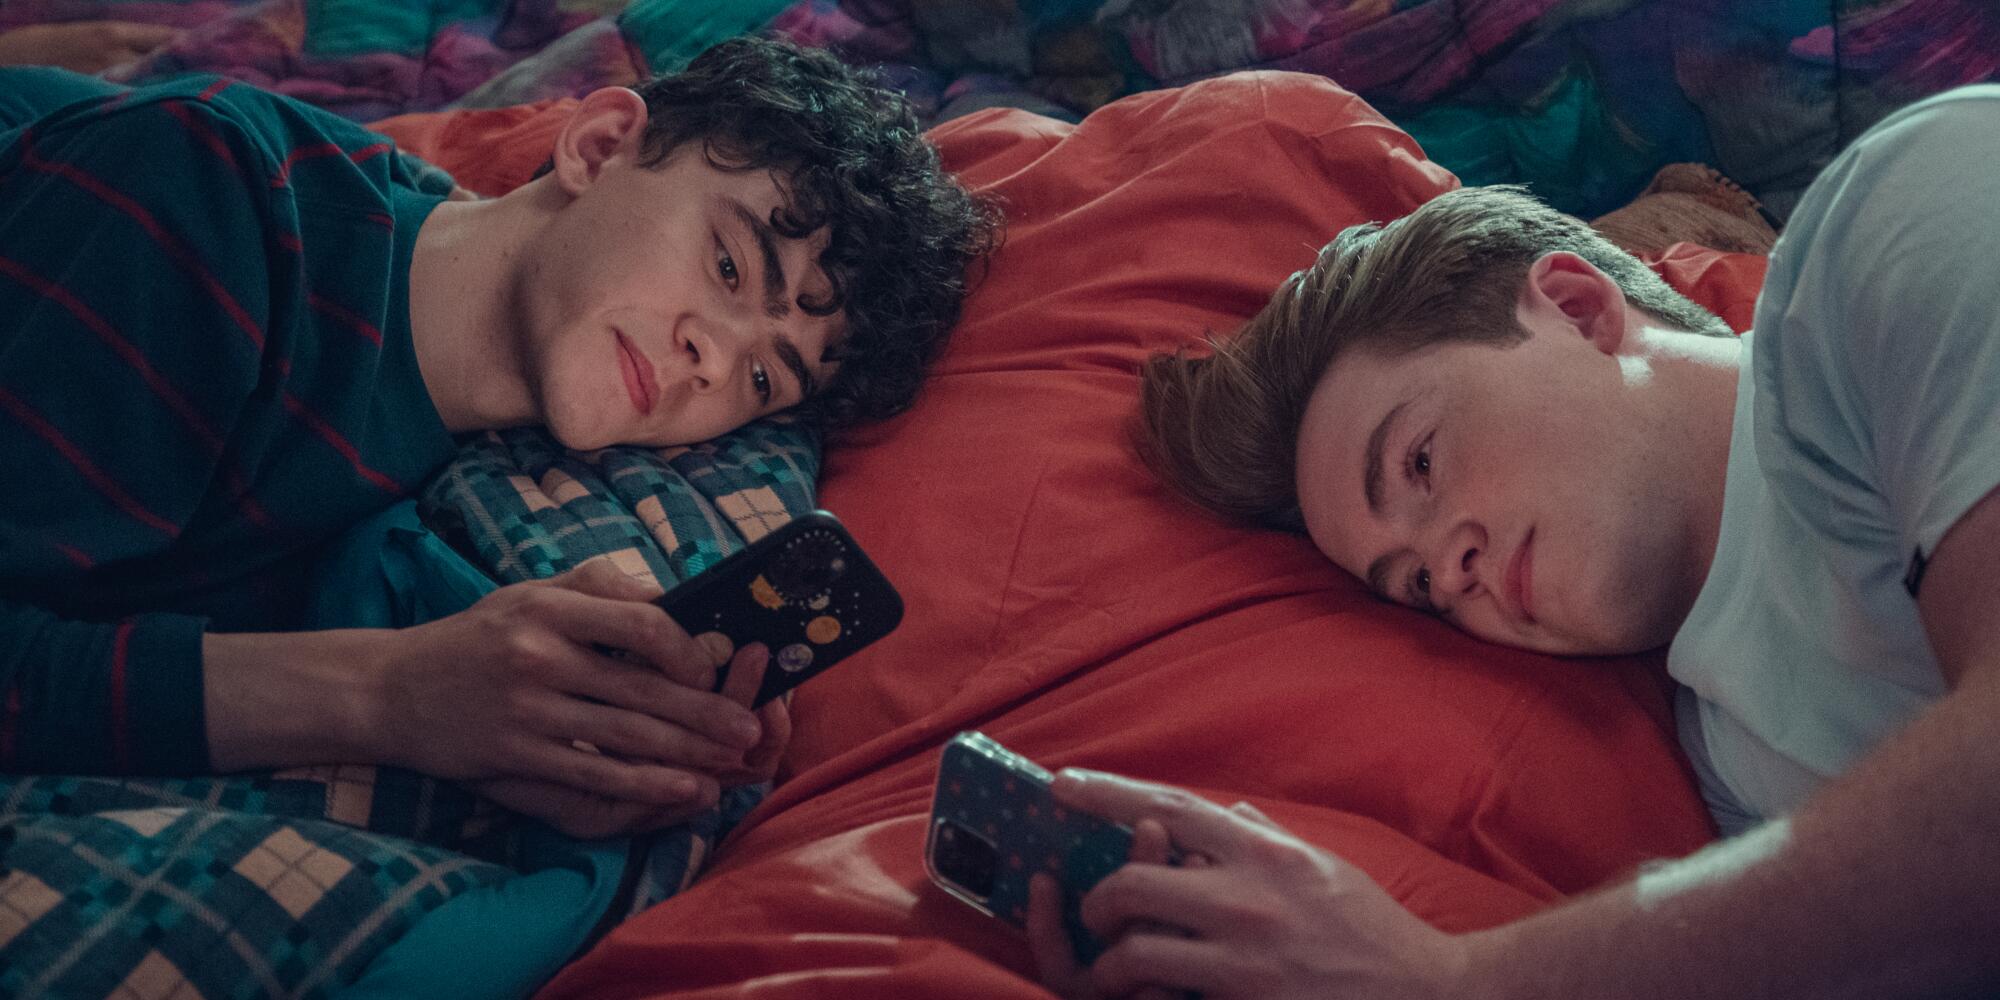 Two teenagers lie in sleeping bags close to each other looking at their phones "Heart catcher."